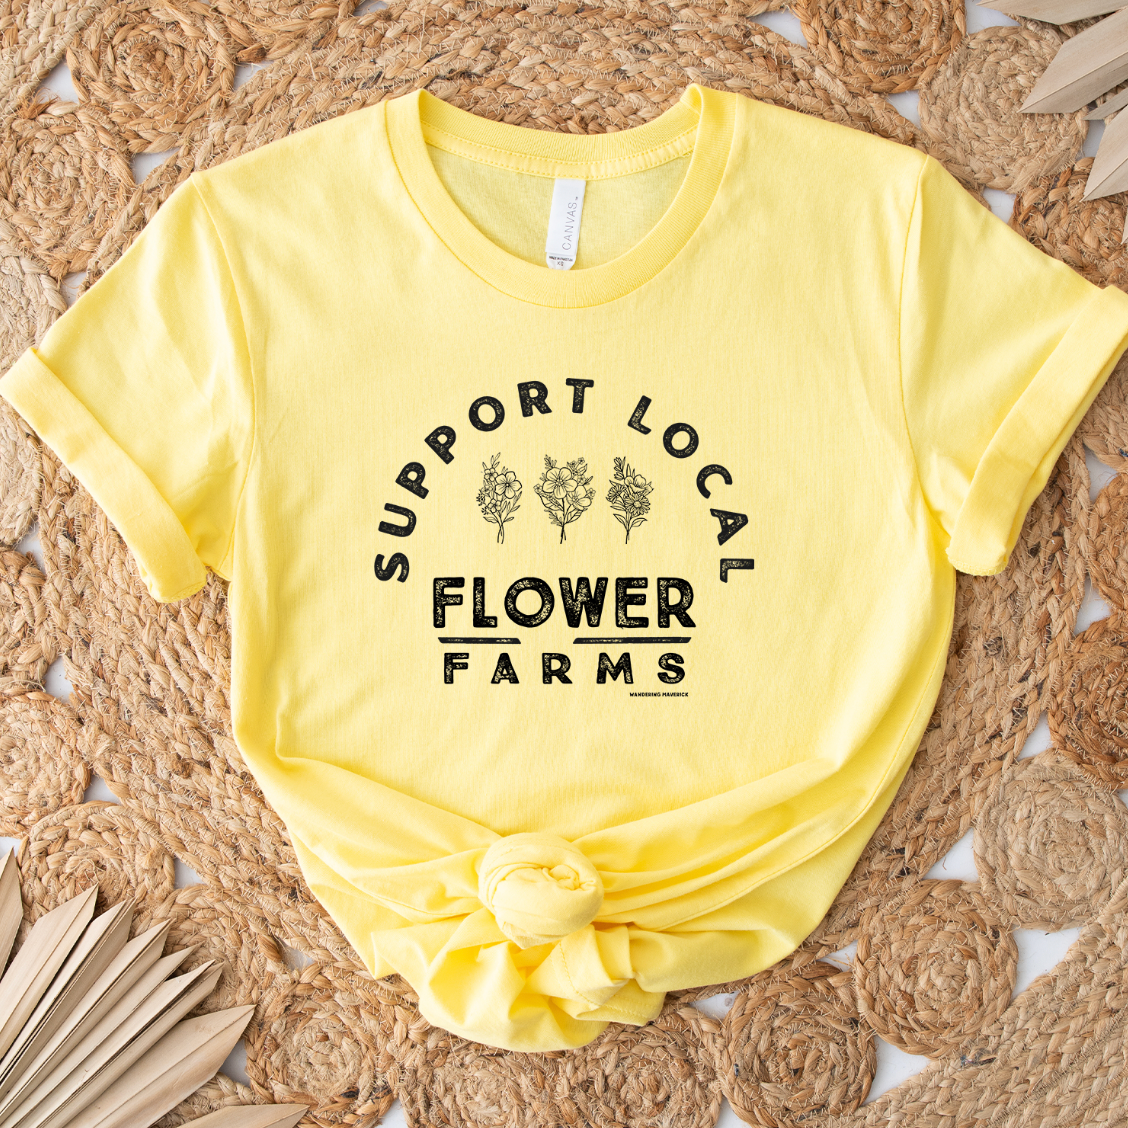 Support Local Flower Farms T-Shirt (XS-4XL) - Multiple Colors!